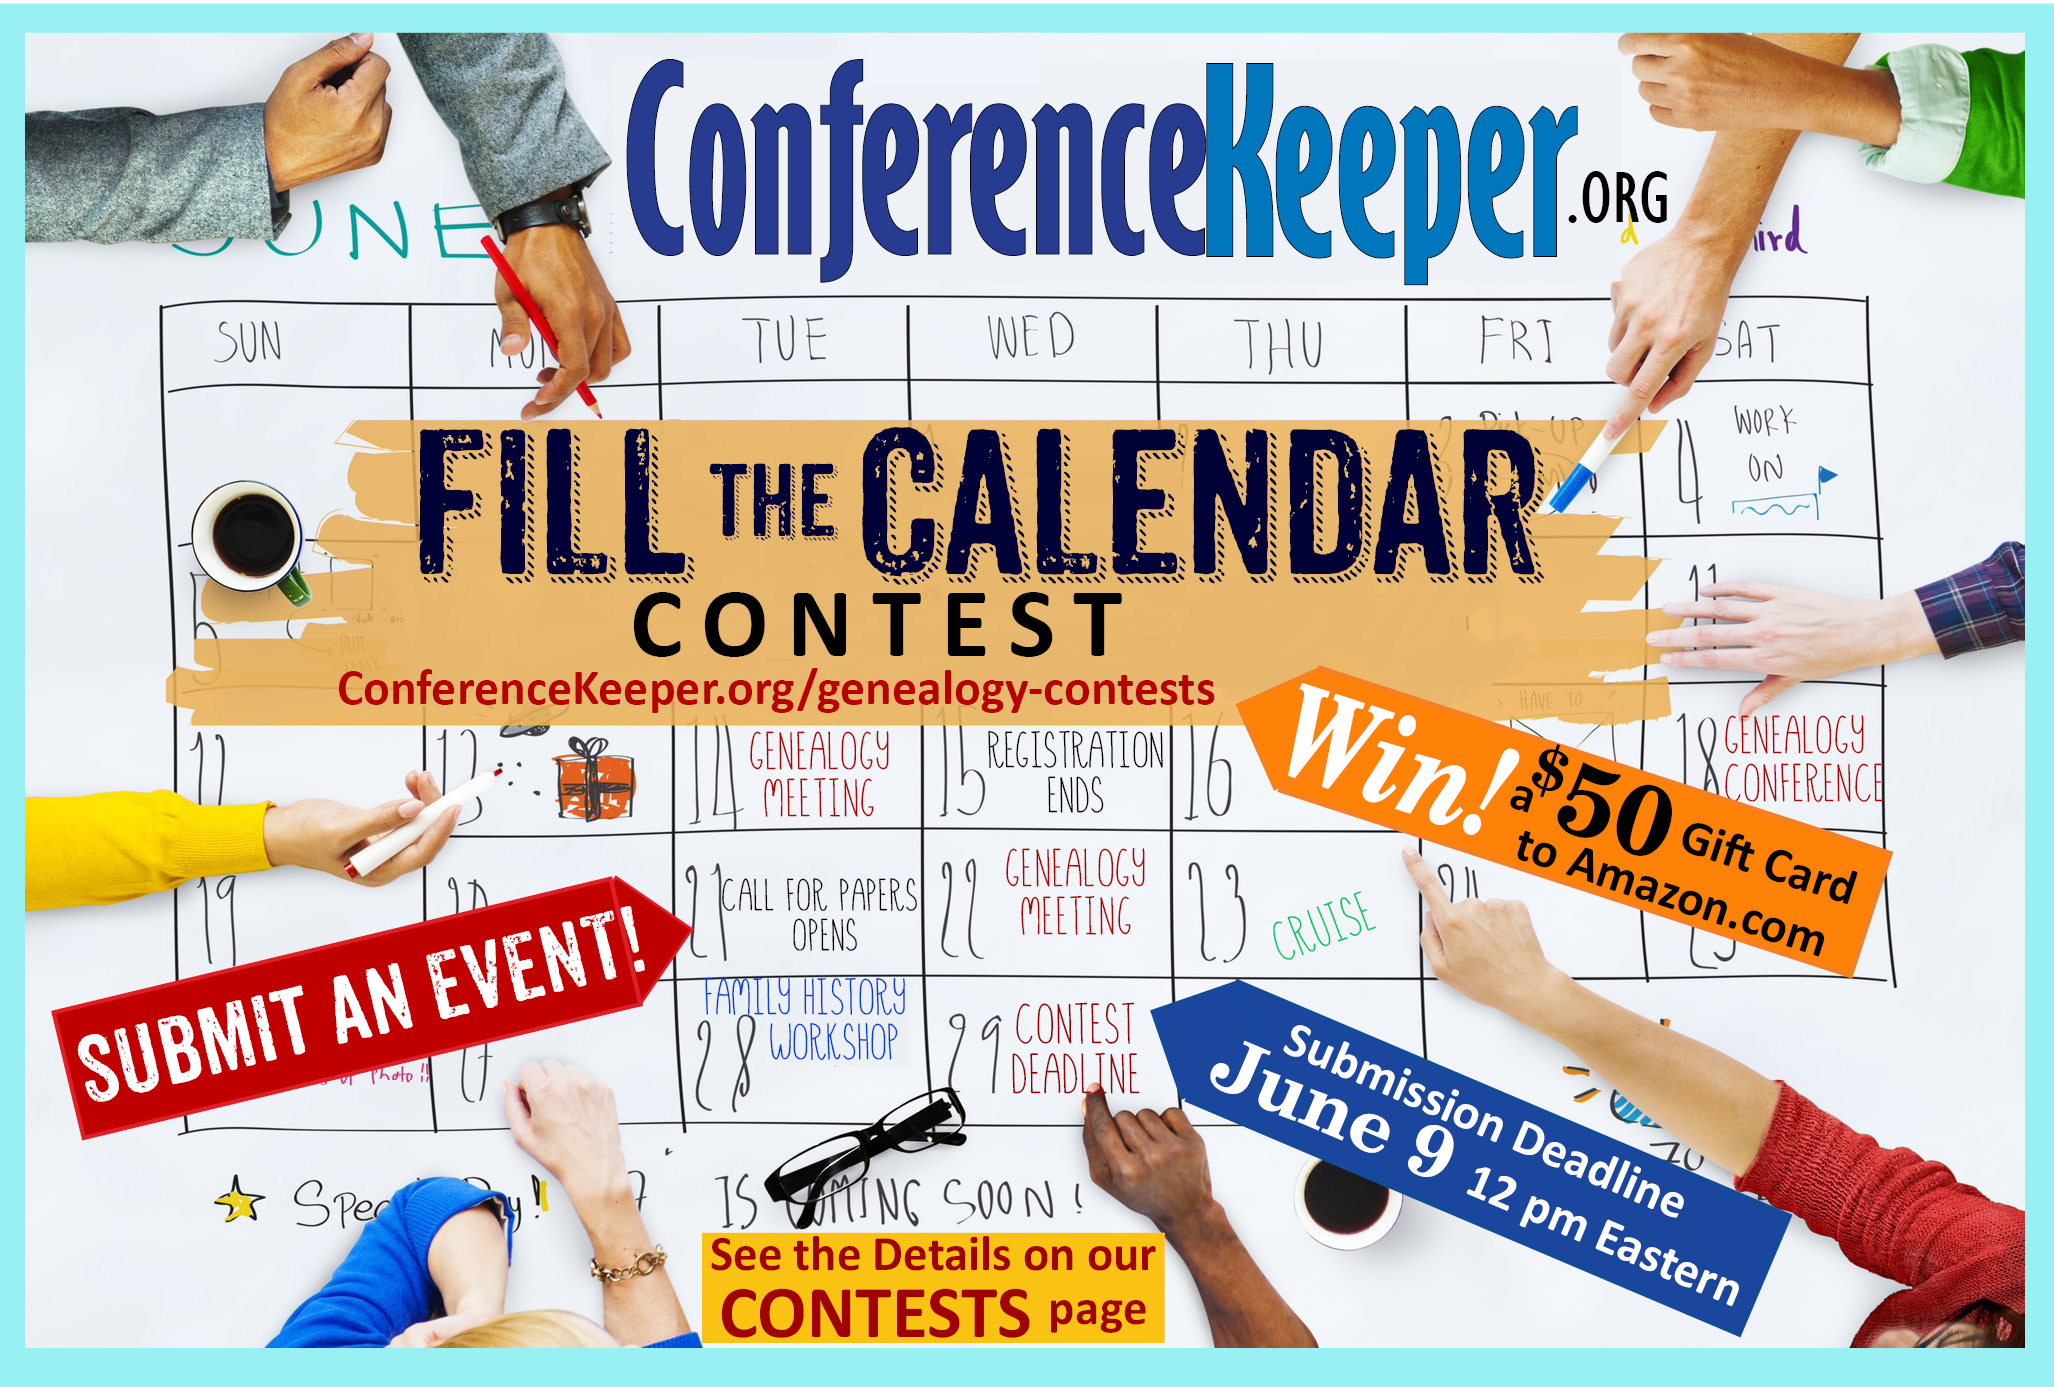 ConferenceKeeper's "Fill The Calendar" Contest